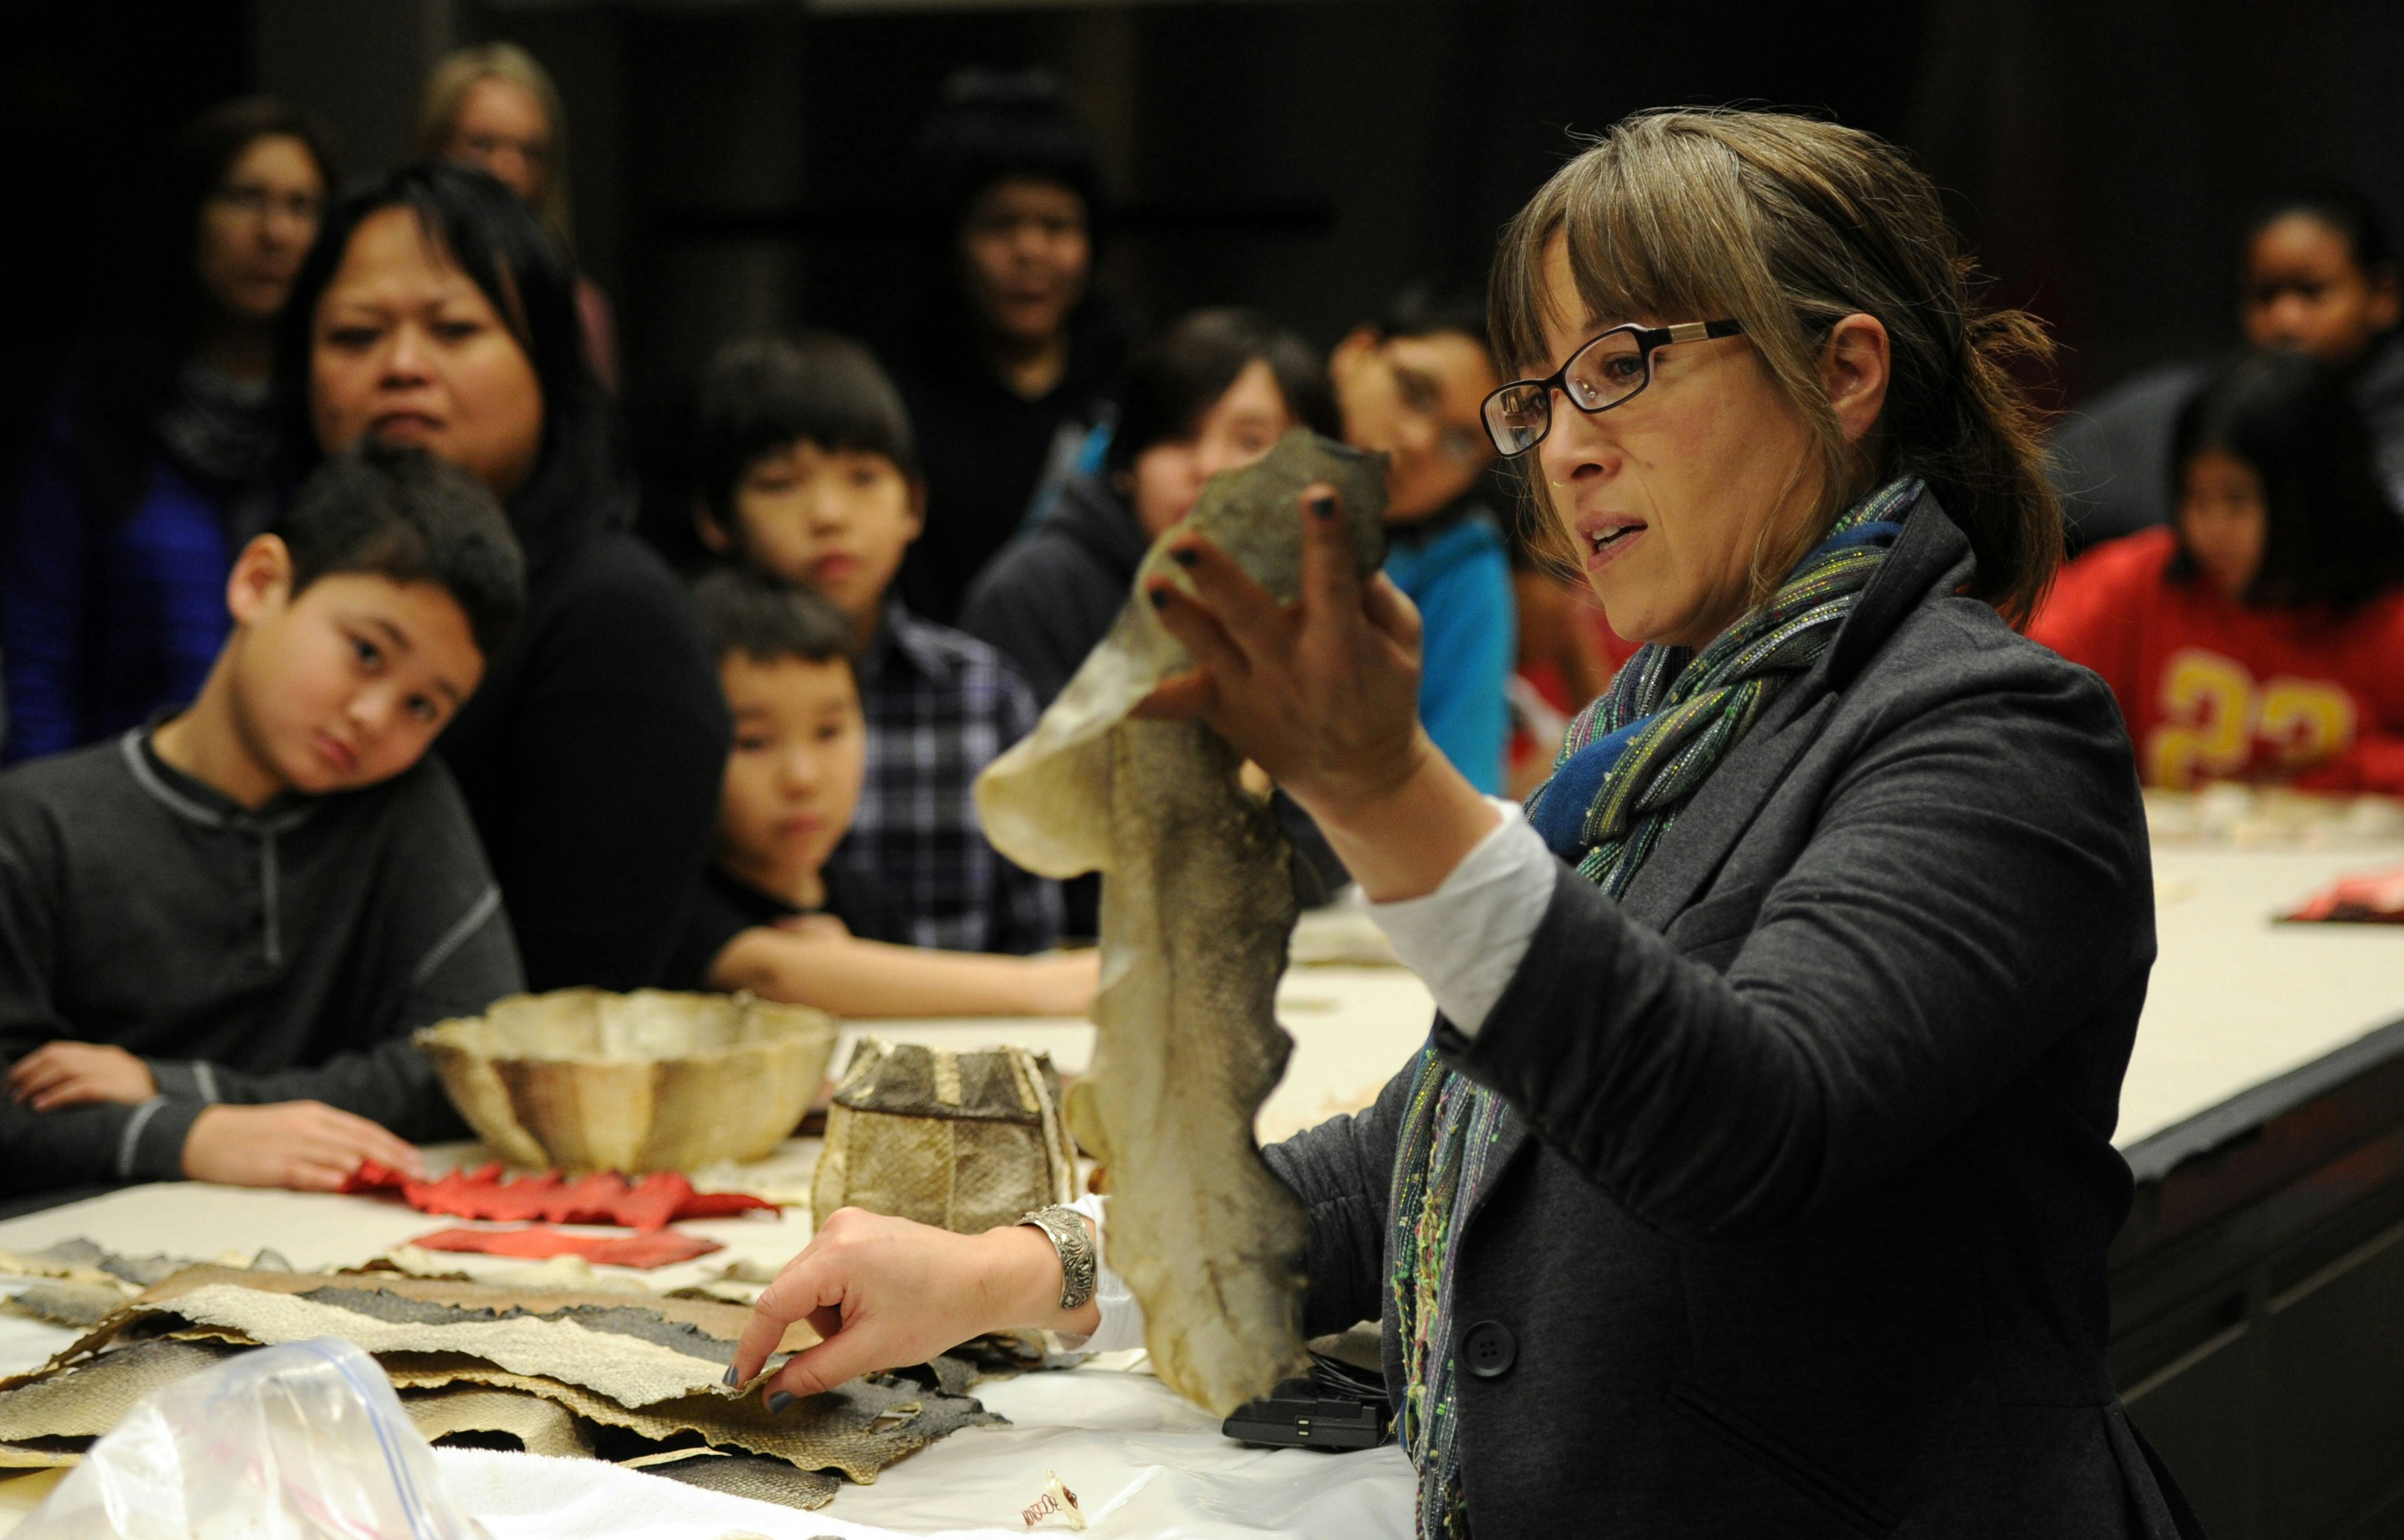 A woman holds a fish skin during a demonstration of Alaska Native practices